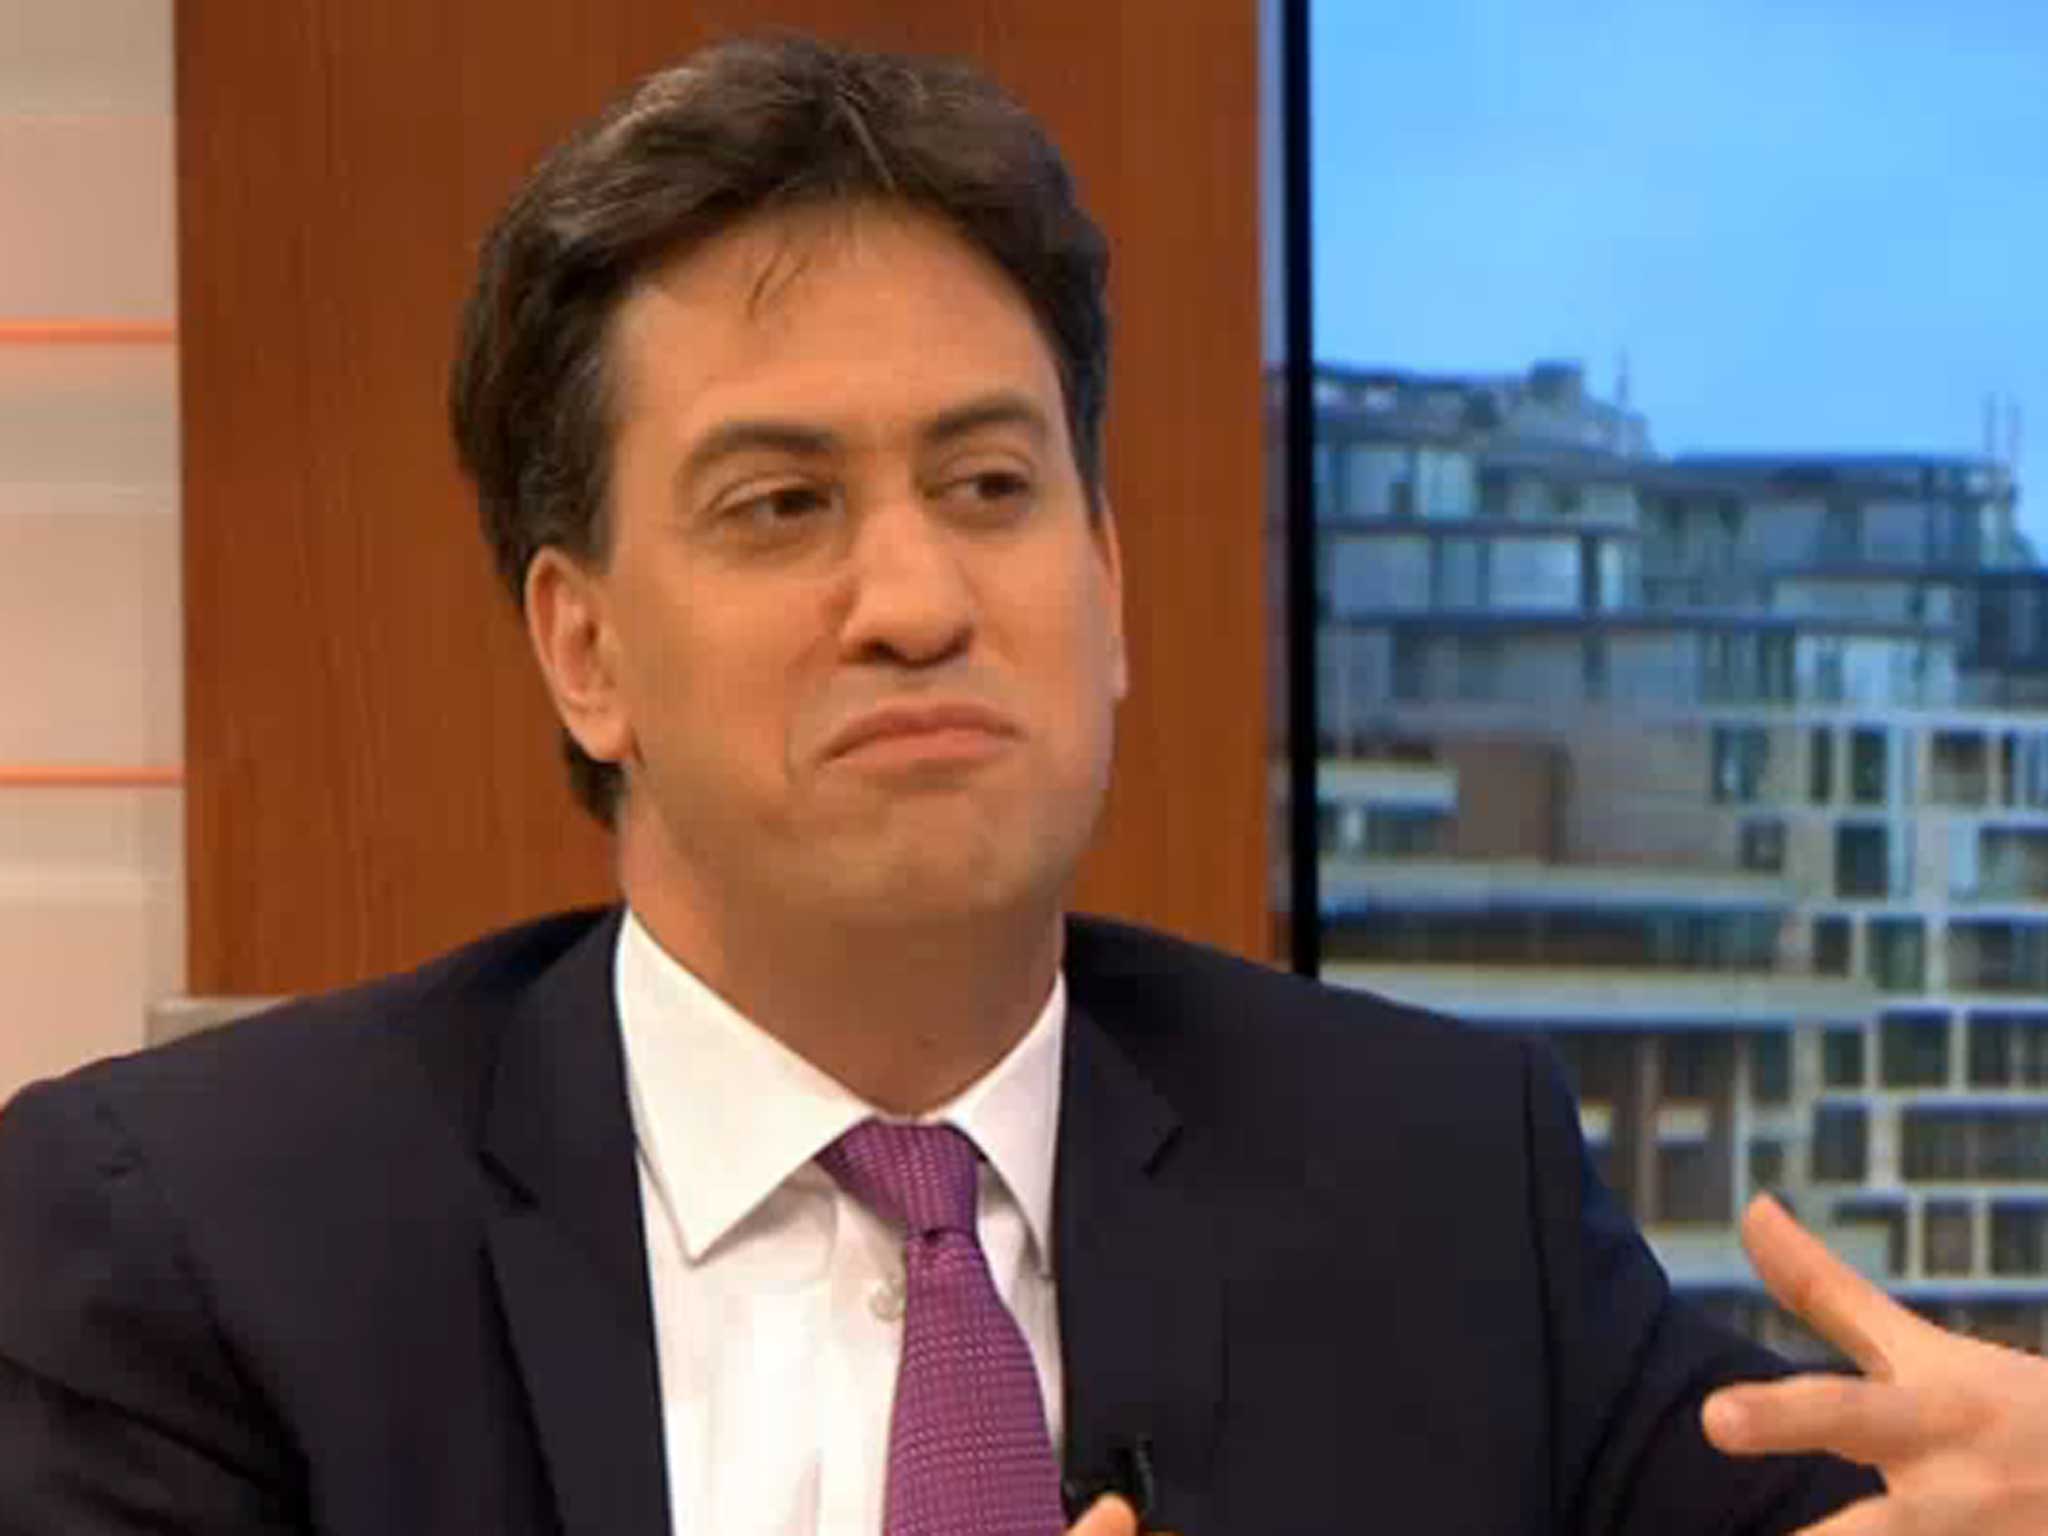 Miliband on the Good Morning Britain show earlier today, 20 May 2014